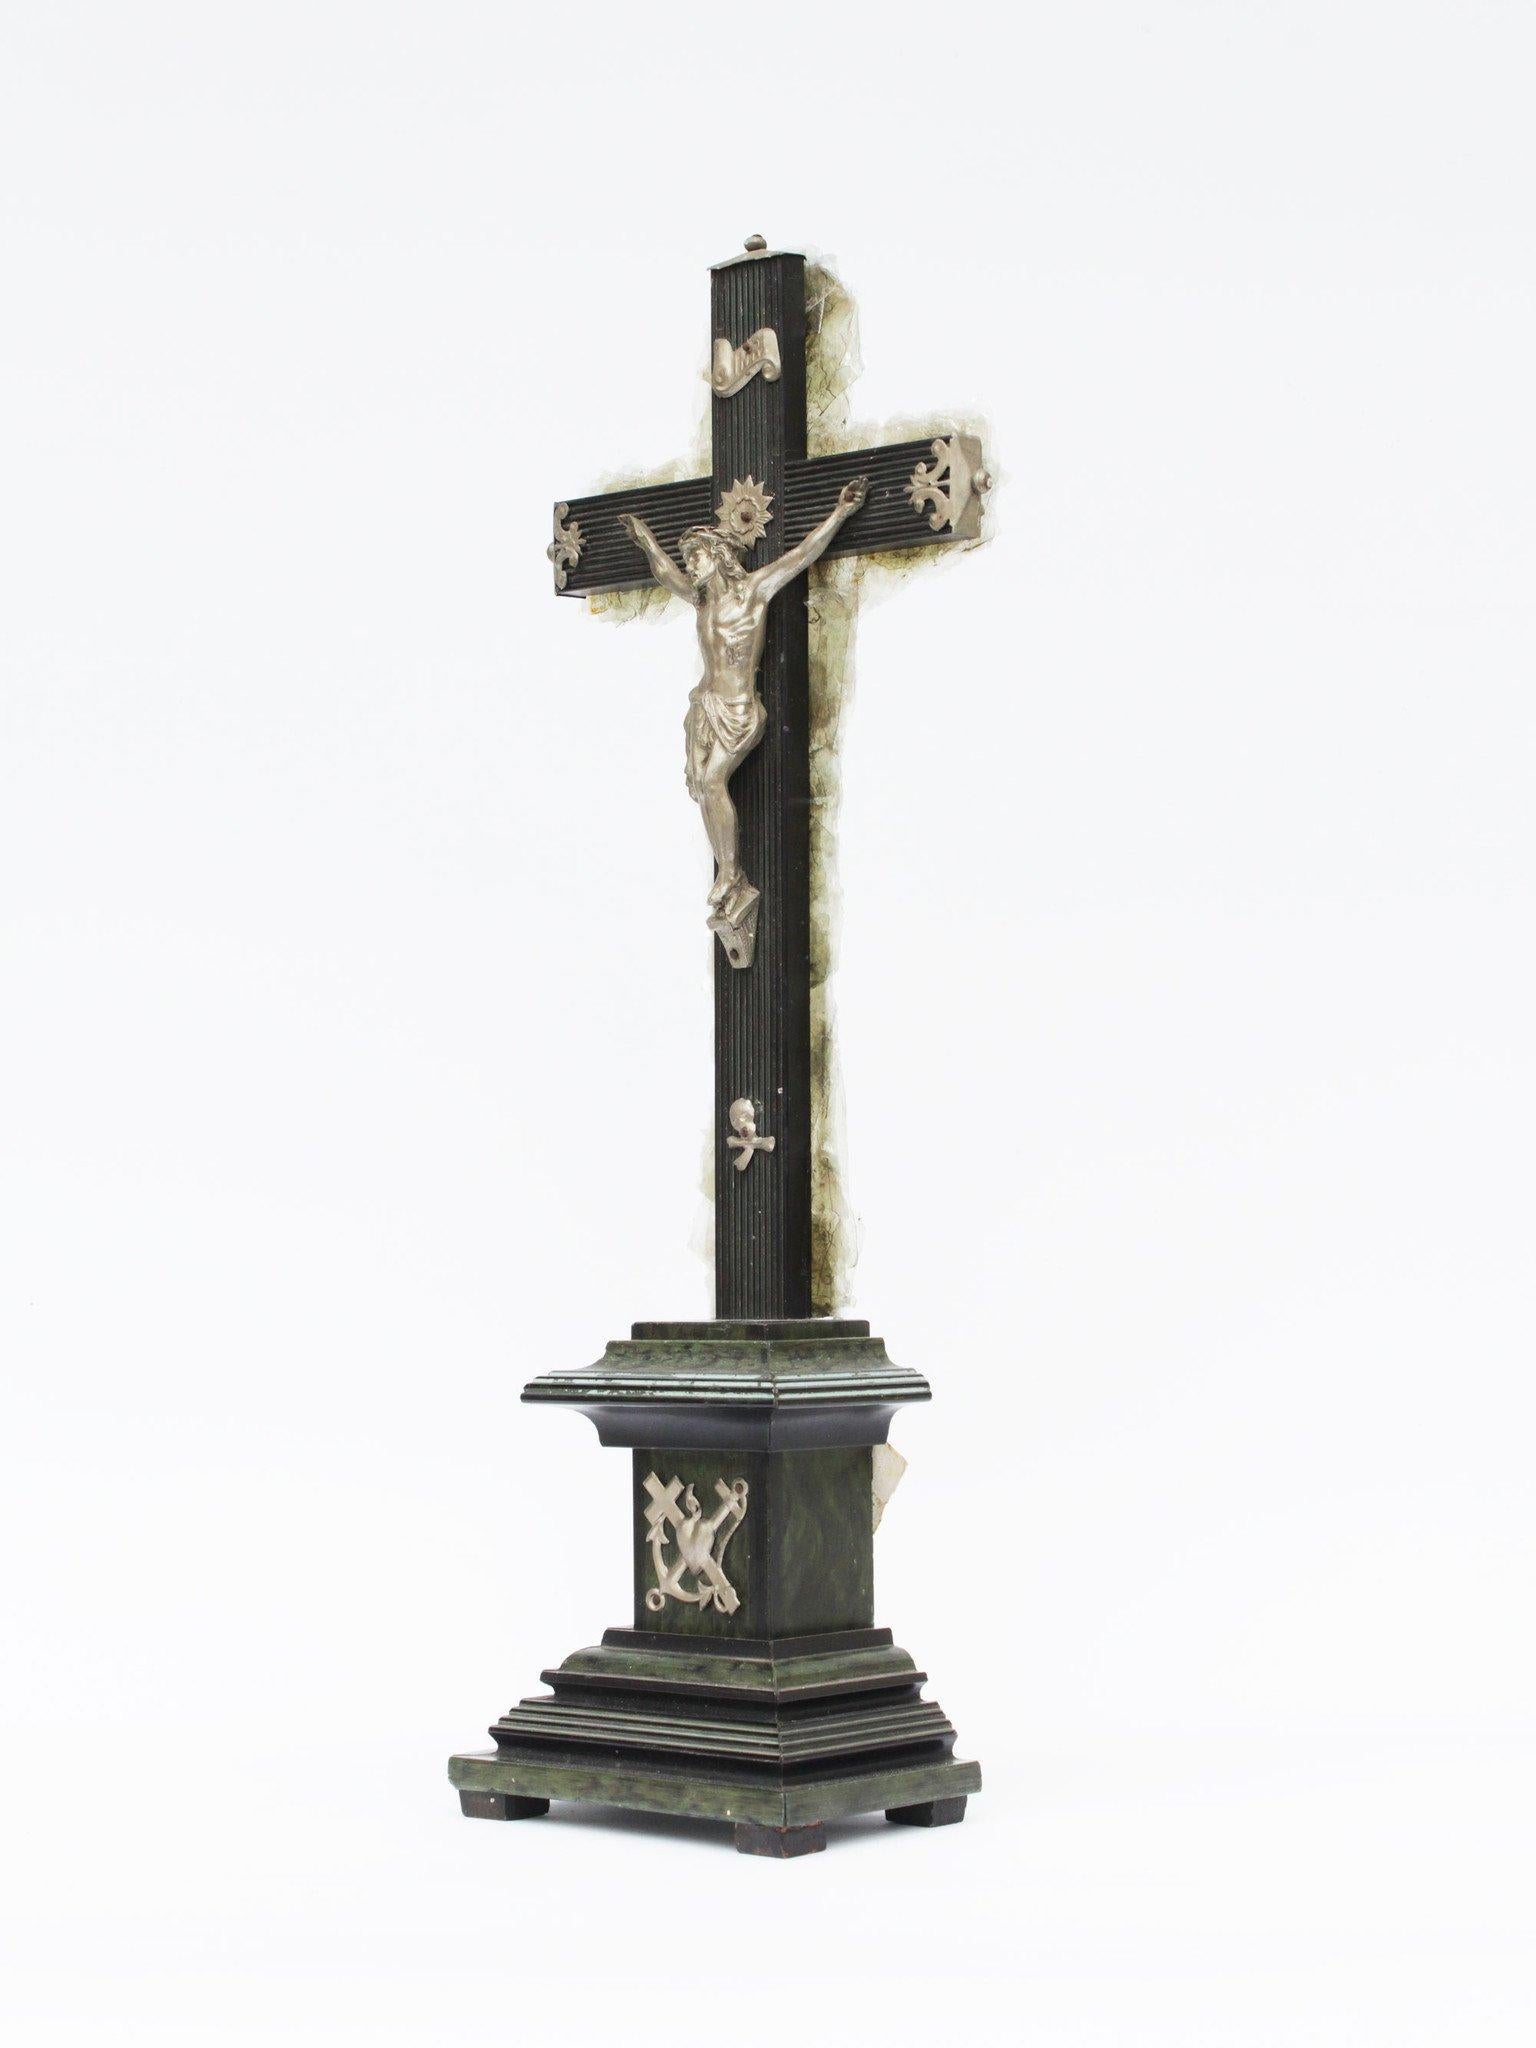 19th Century French Marbleized Painted Crucifix with Green Mica In Good Condition For Sale In Dublin, Dalkey